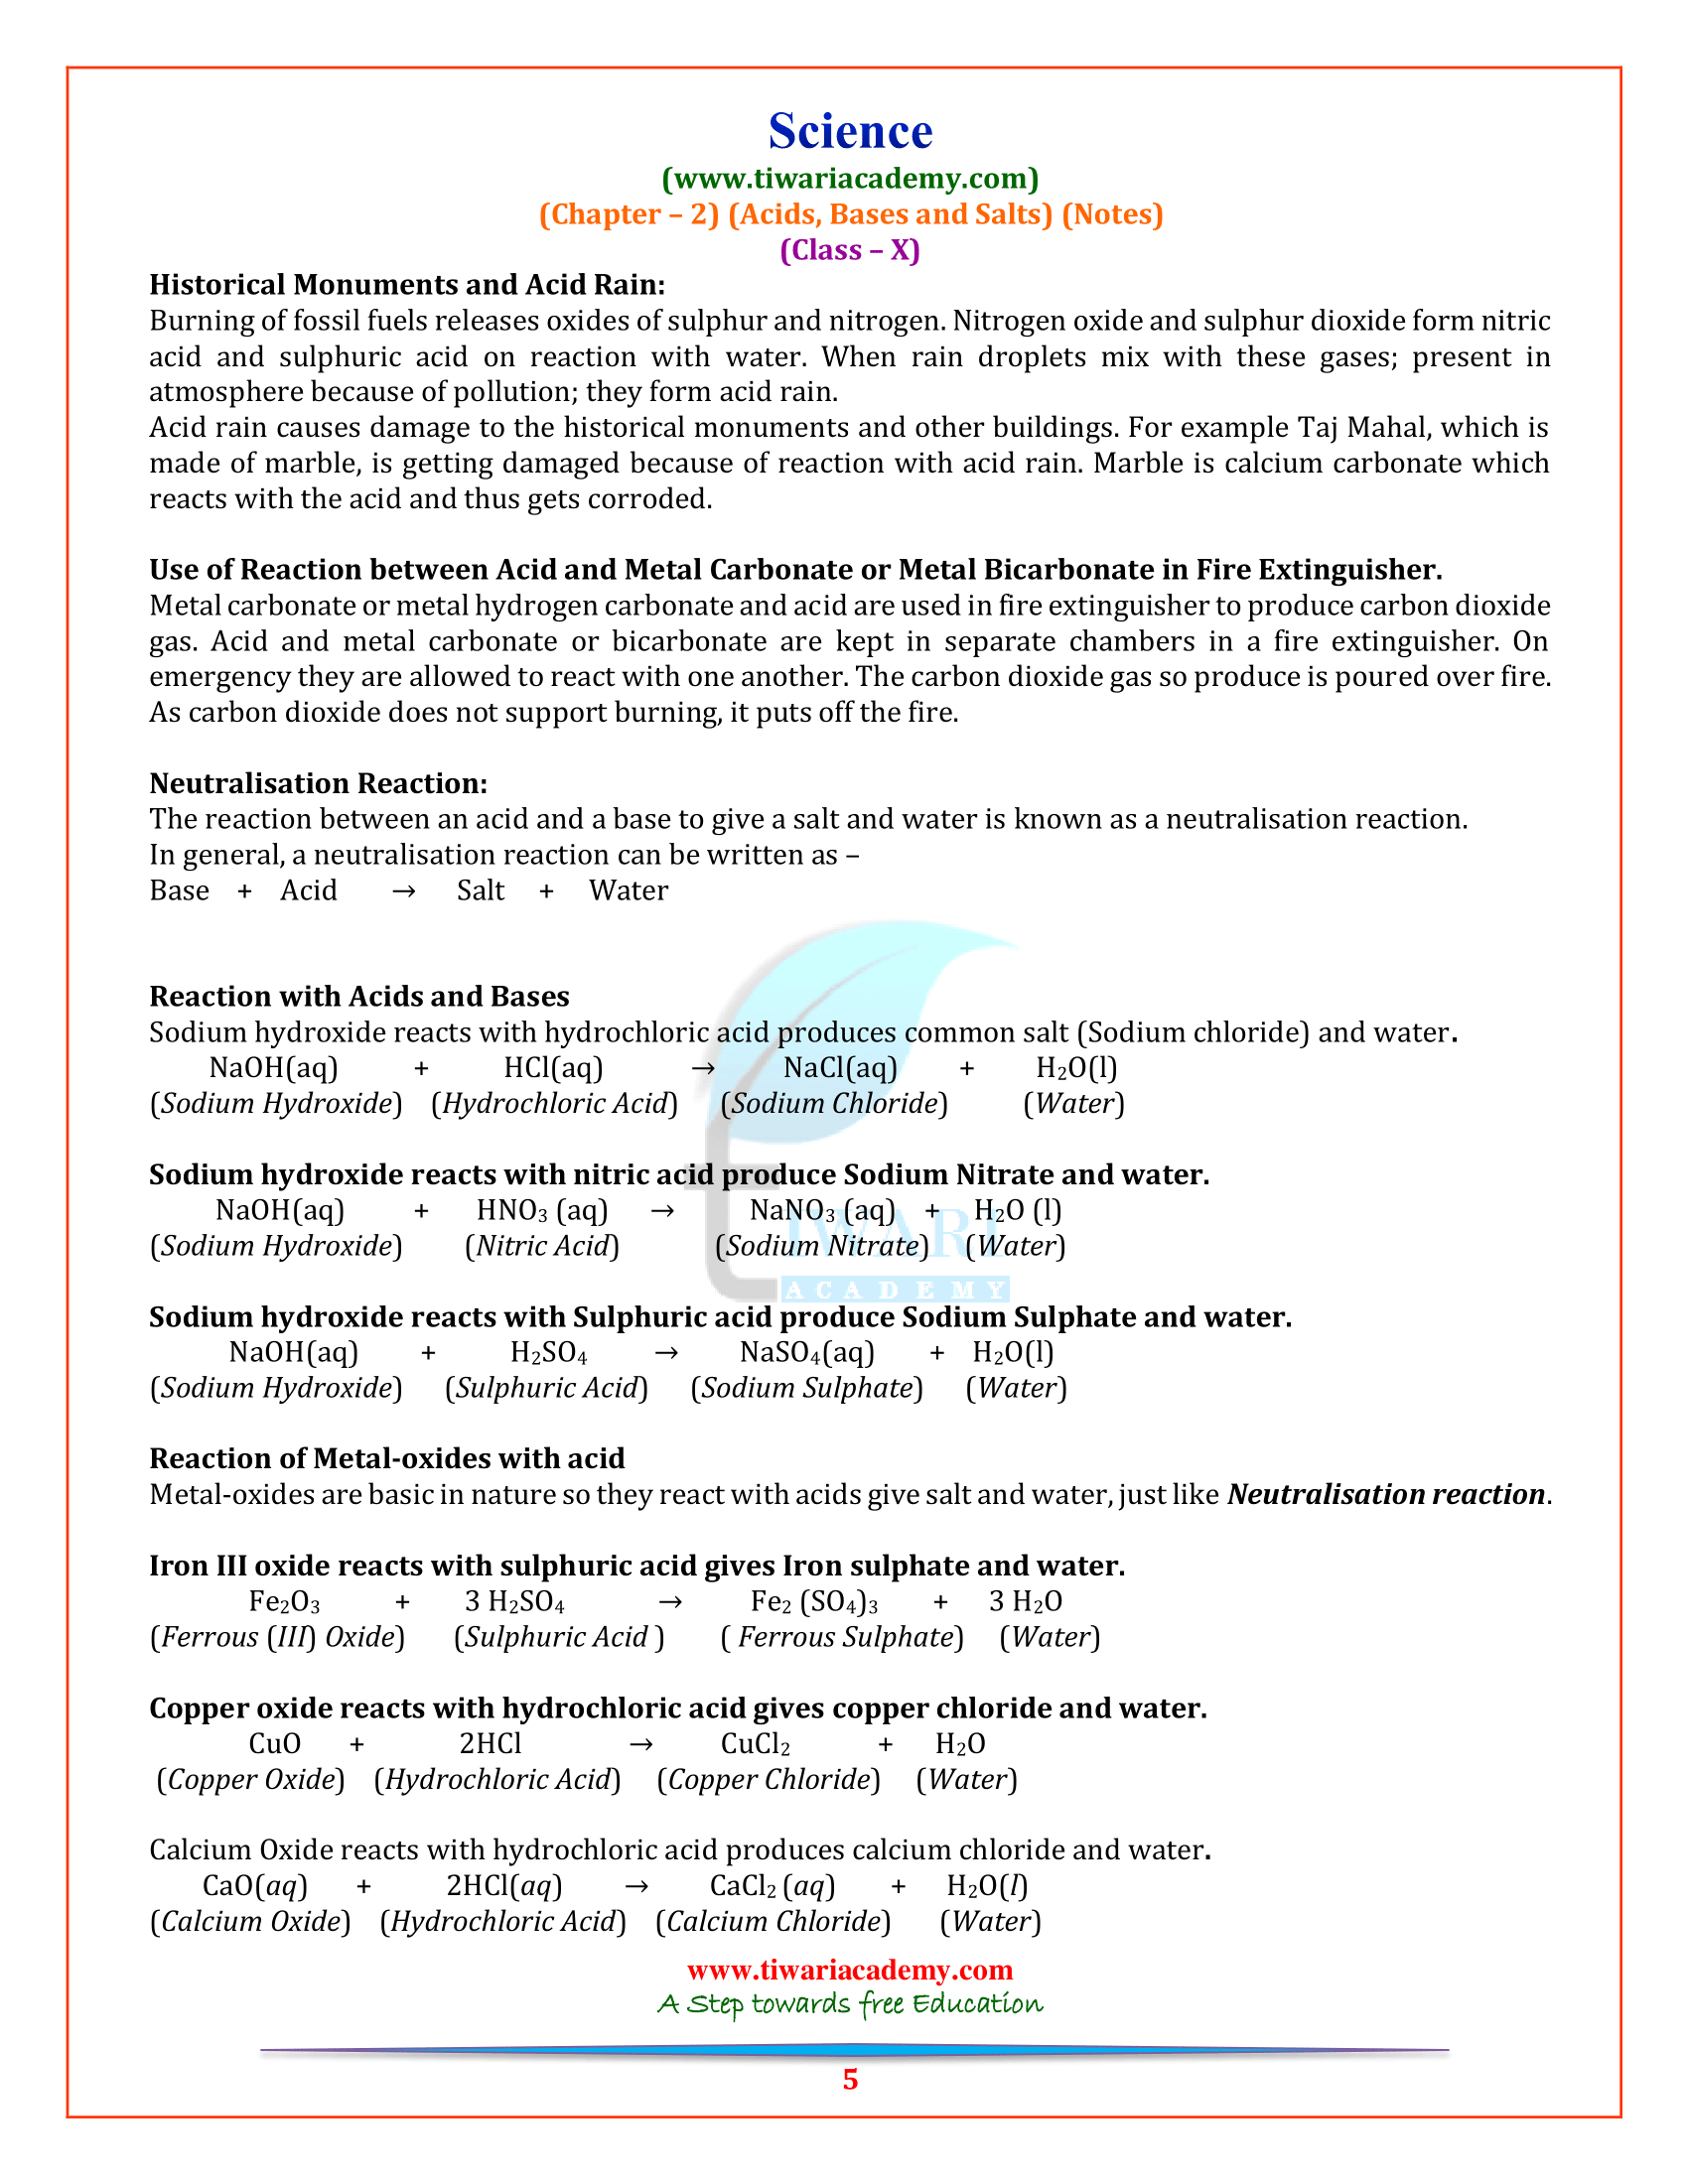 Class 10 Science Chapter 2 Notes